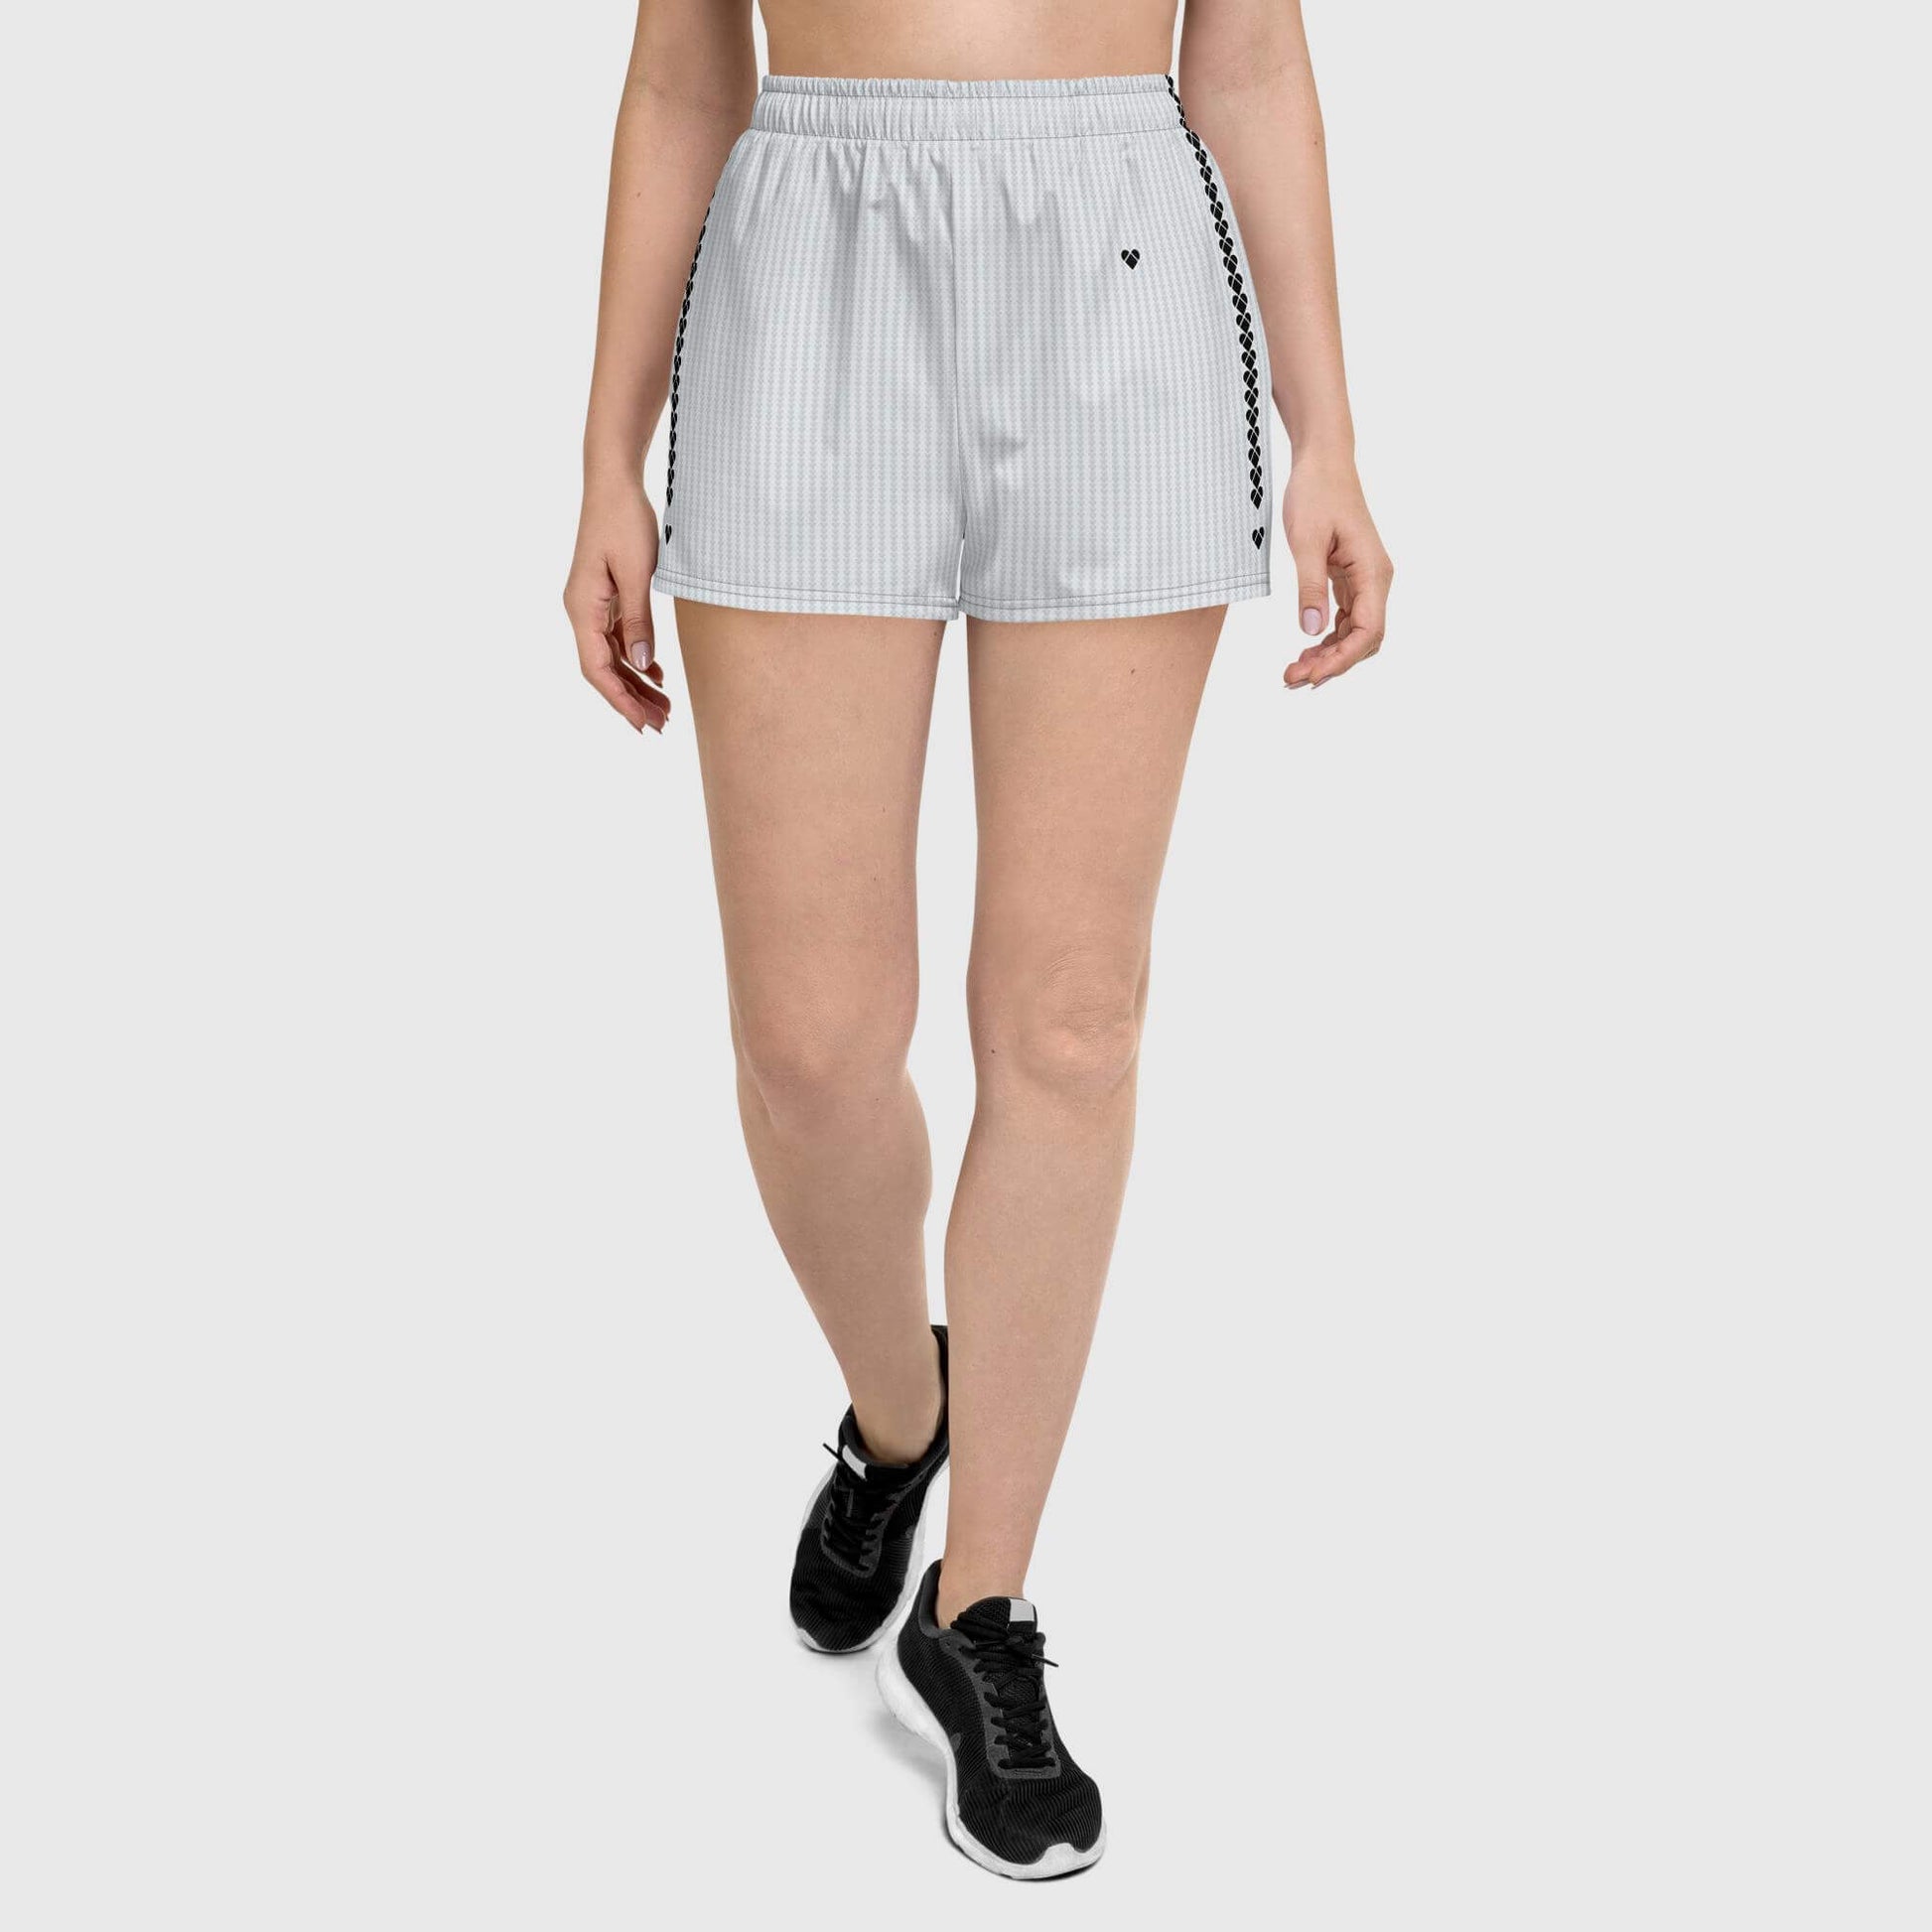 UPF50+ protected light gray sport shorts with distinctive heart logo stripes - front view